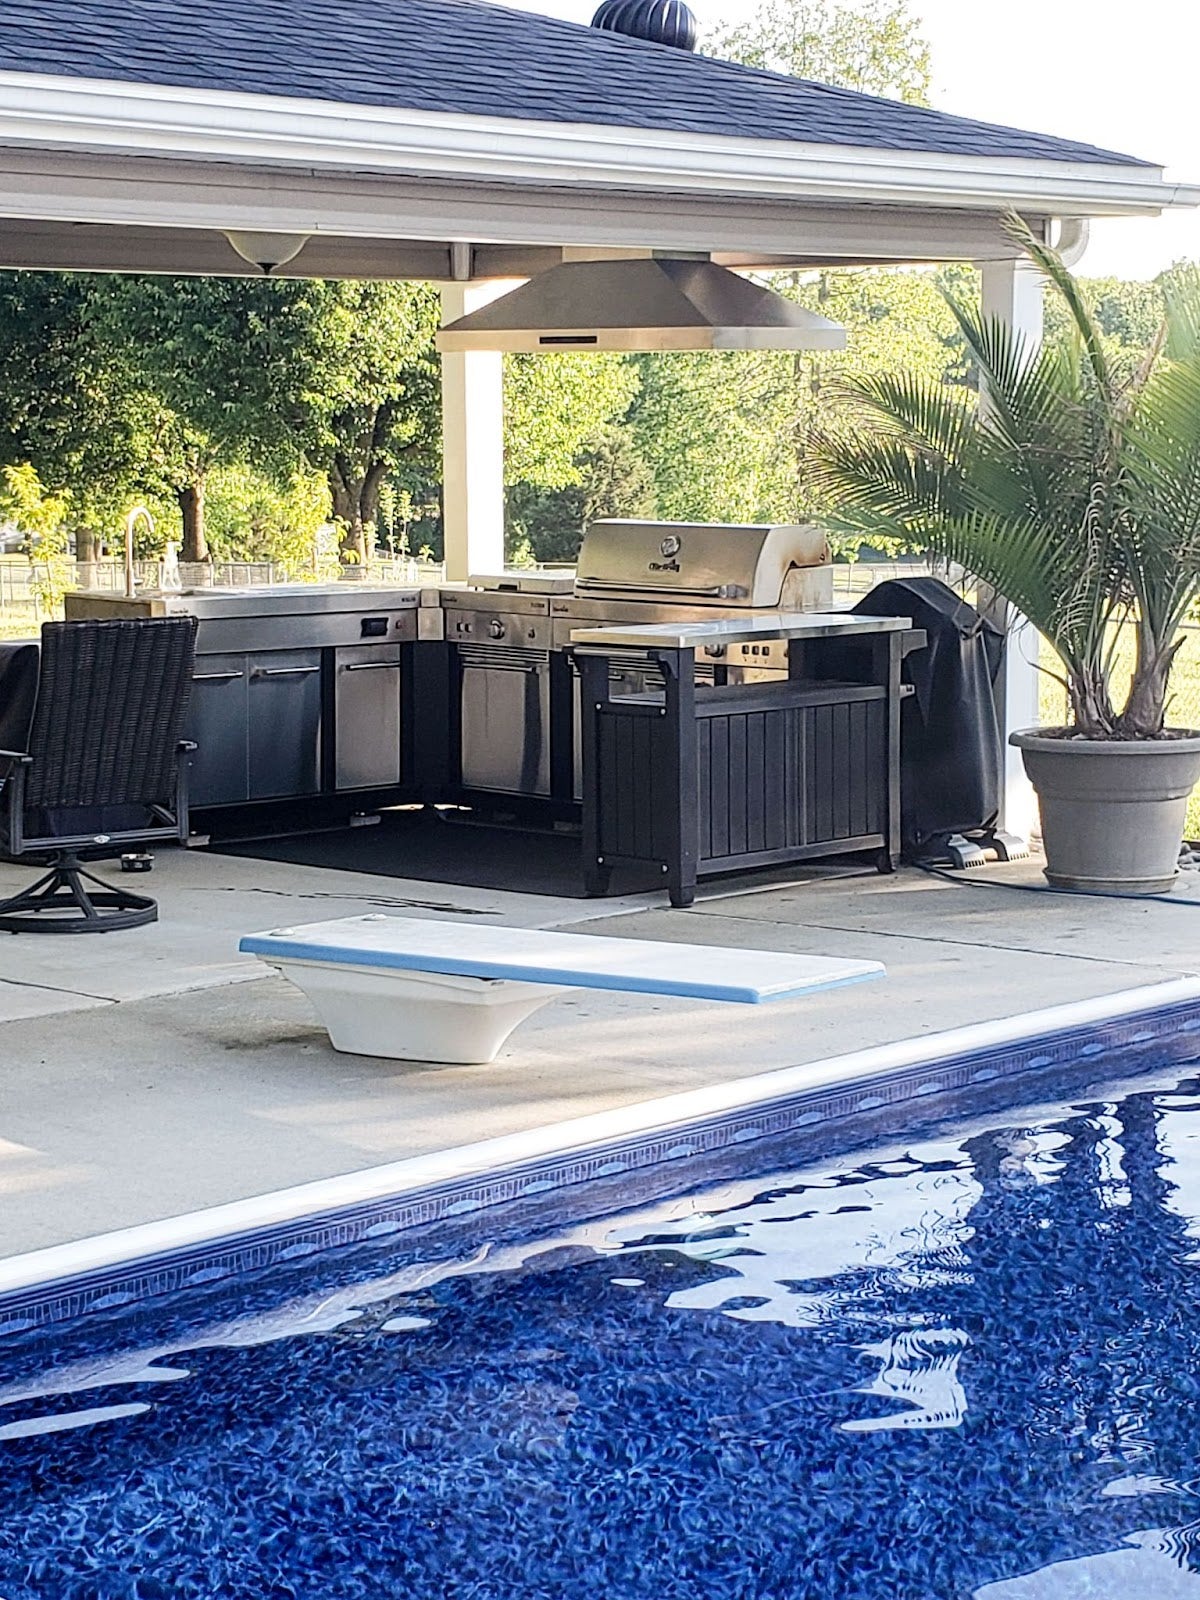 Relaxing outdoor cooking space featuring a Proline range hood by a tranquil swimming pool - prolinerangehoods.com